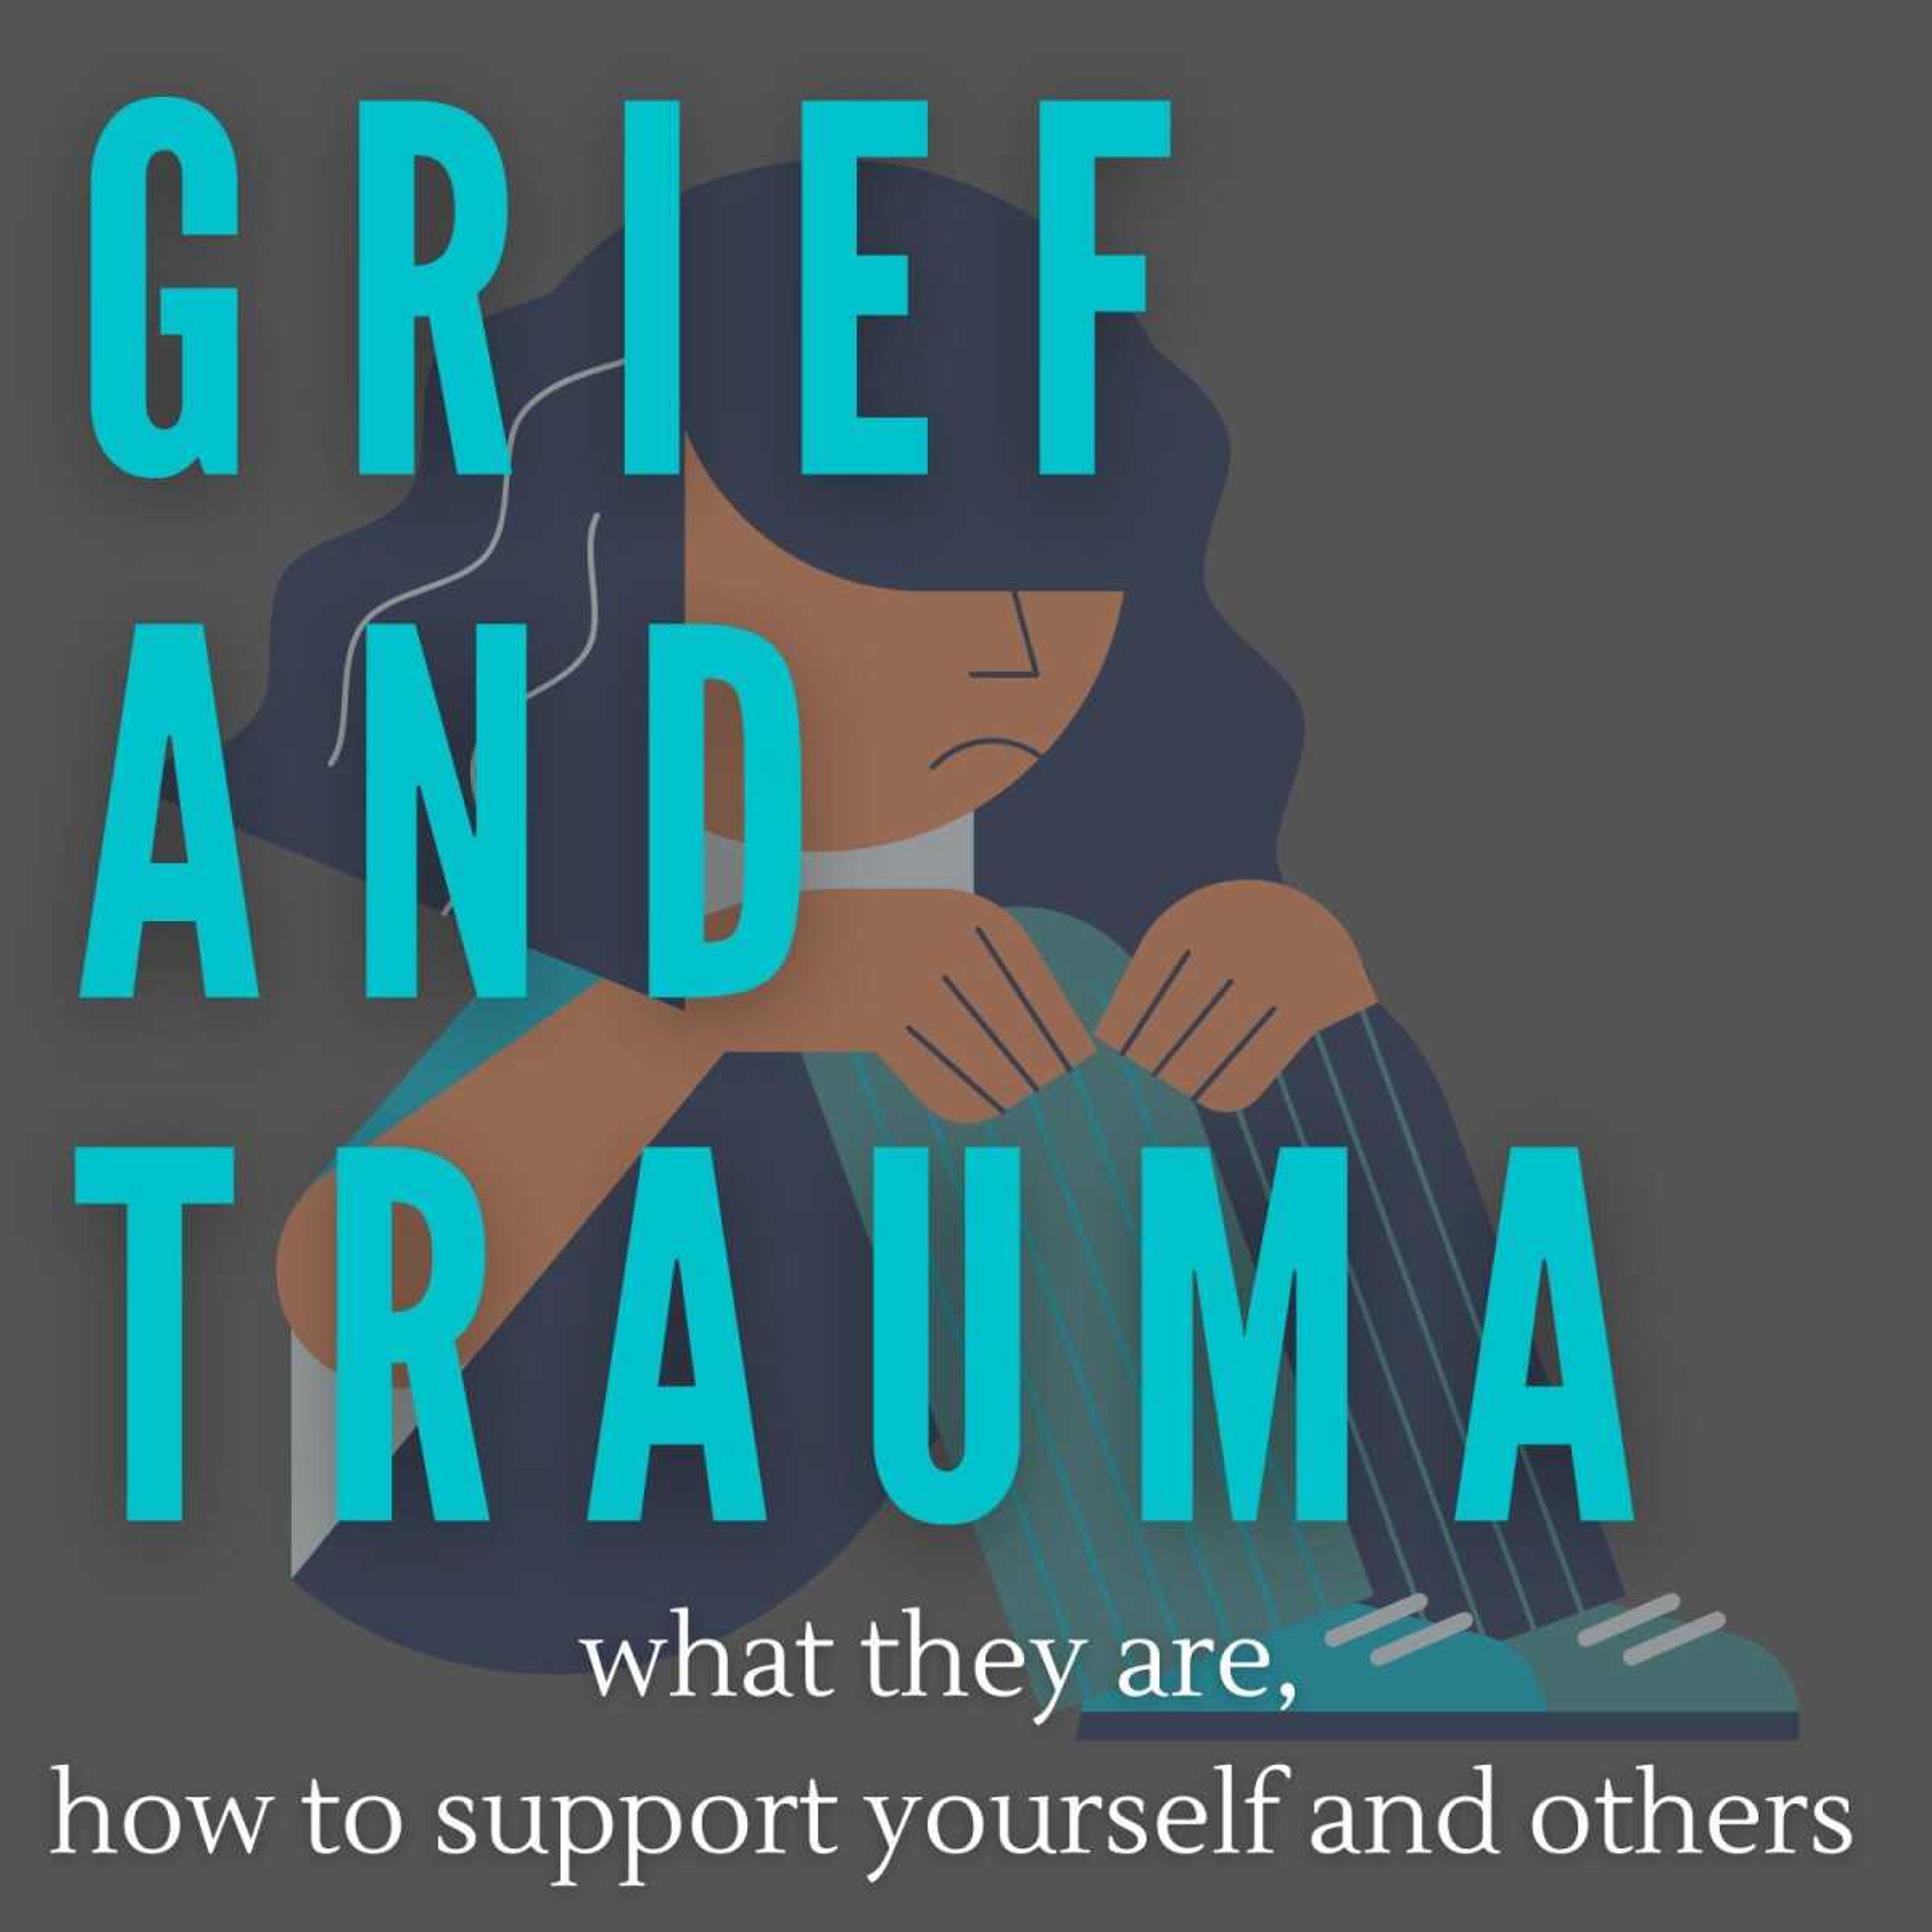 Grief and trauma: what they are, how to support yourself and others